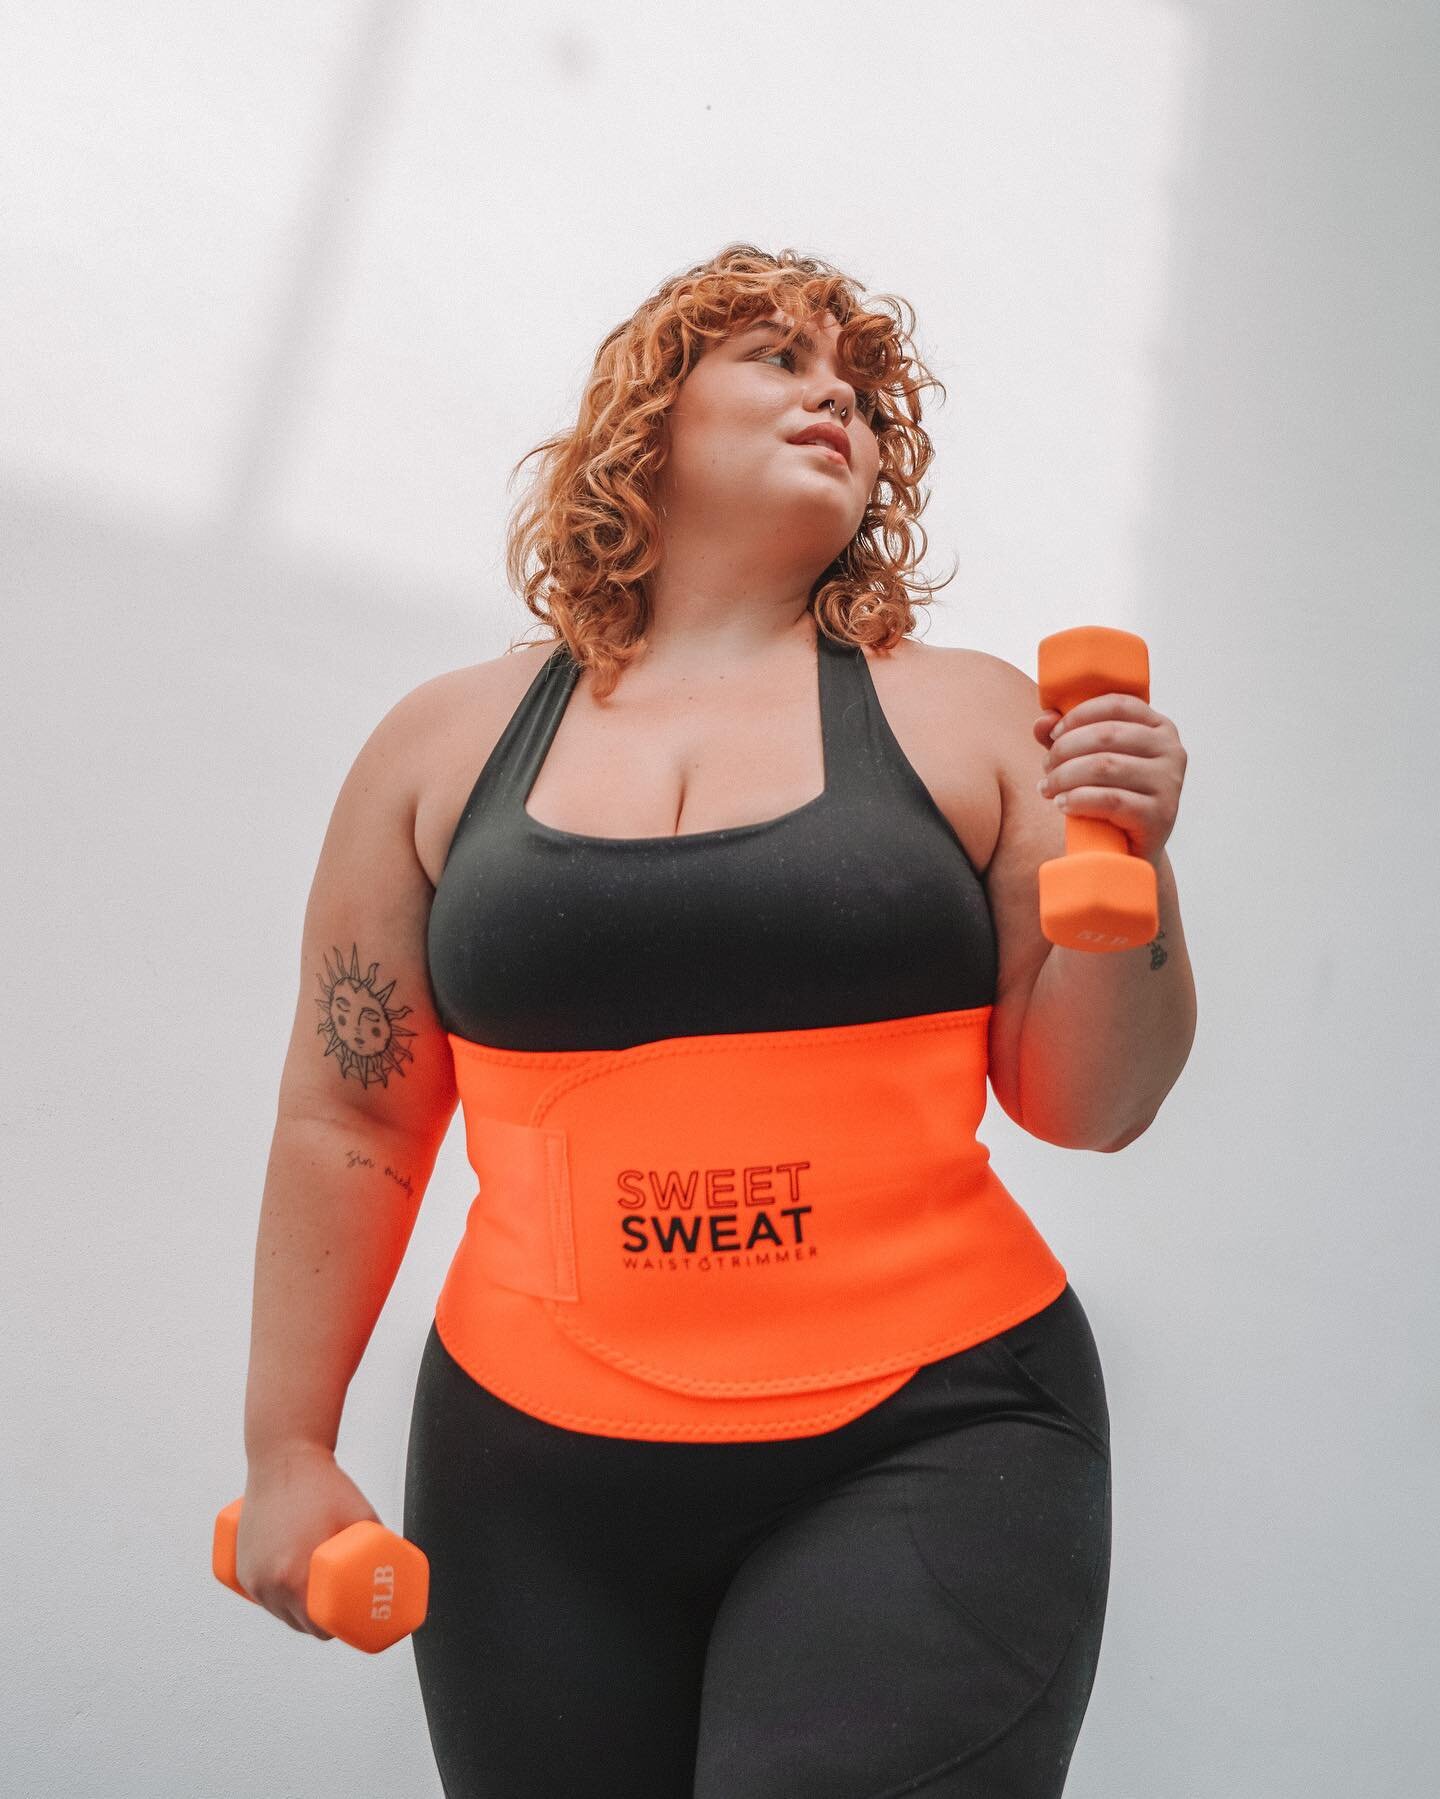 Ready to SWEAT in the new @sweetsweat neon waist trimmers 💪🏼

📸 @moodtheagency @thejessicaexperience